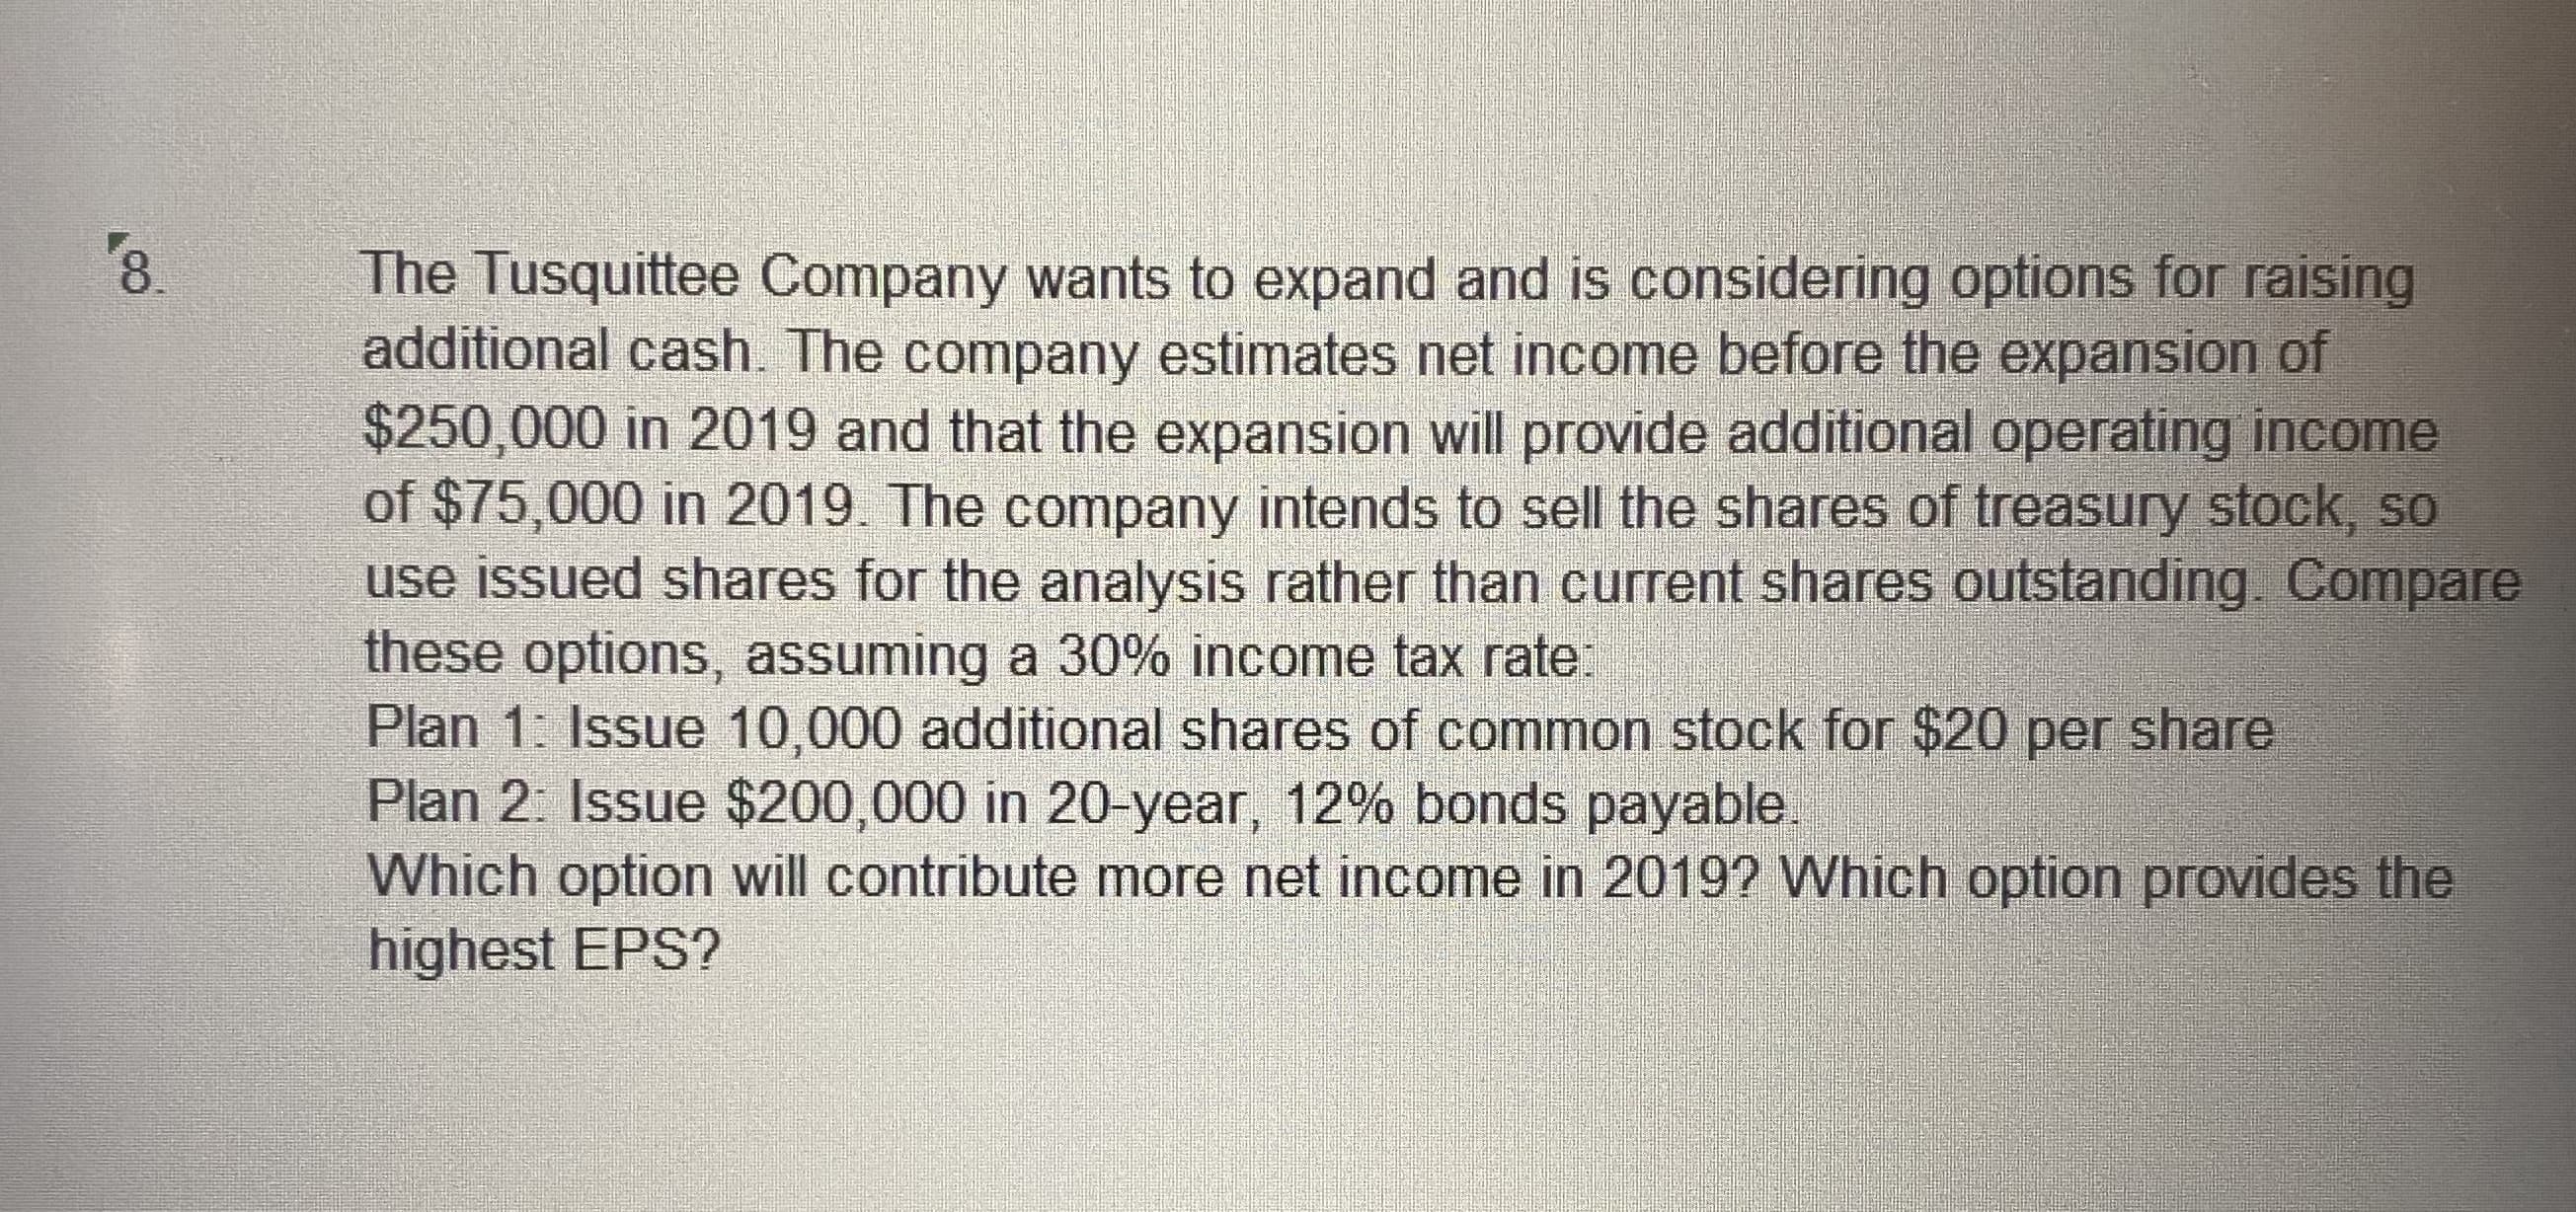 8.
The Tusquittee Company wants to expand and is considering options for raising
additional cash. The company estimates net income before the expansion of
$250,000 in 2019 and that the expansion will provide additional operating income
of $75,000 in 2019. The company intends to sell the shares of treasury stock, so
use issued shares for the analysis rather than current shares outstanding. Compare
these options, assuming a 30% income tax rate:
Plan 1: Issue 10,000 additional shares of common stock for $20 per share
Plan 2: Issue $200,000 in 20-year, 12% bonds payable.
Which option will contribute more net income in 2019? Which option provides the
highest EPS?
